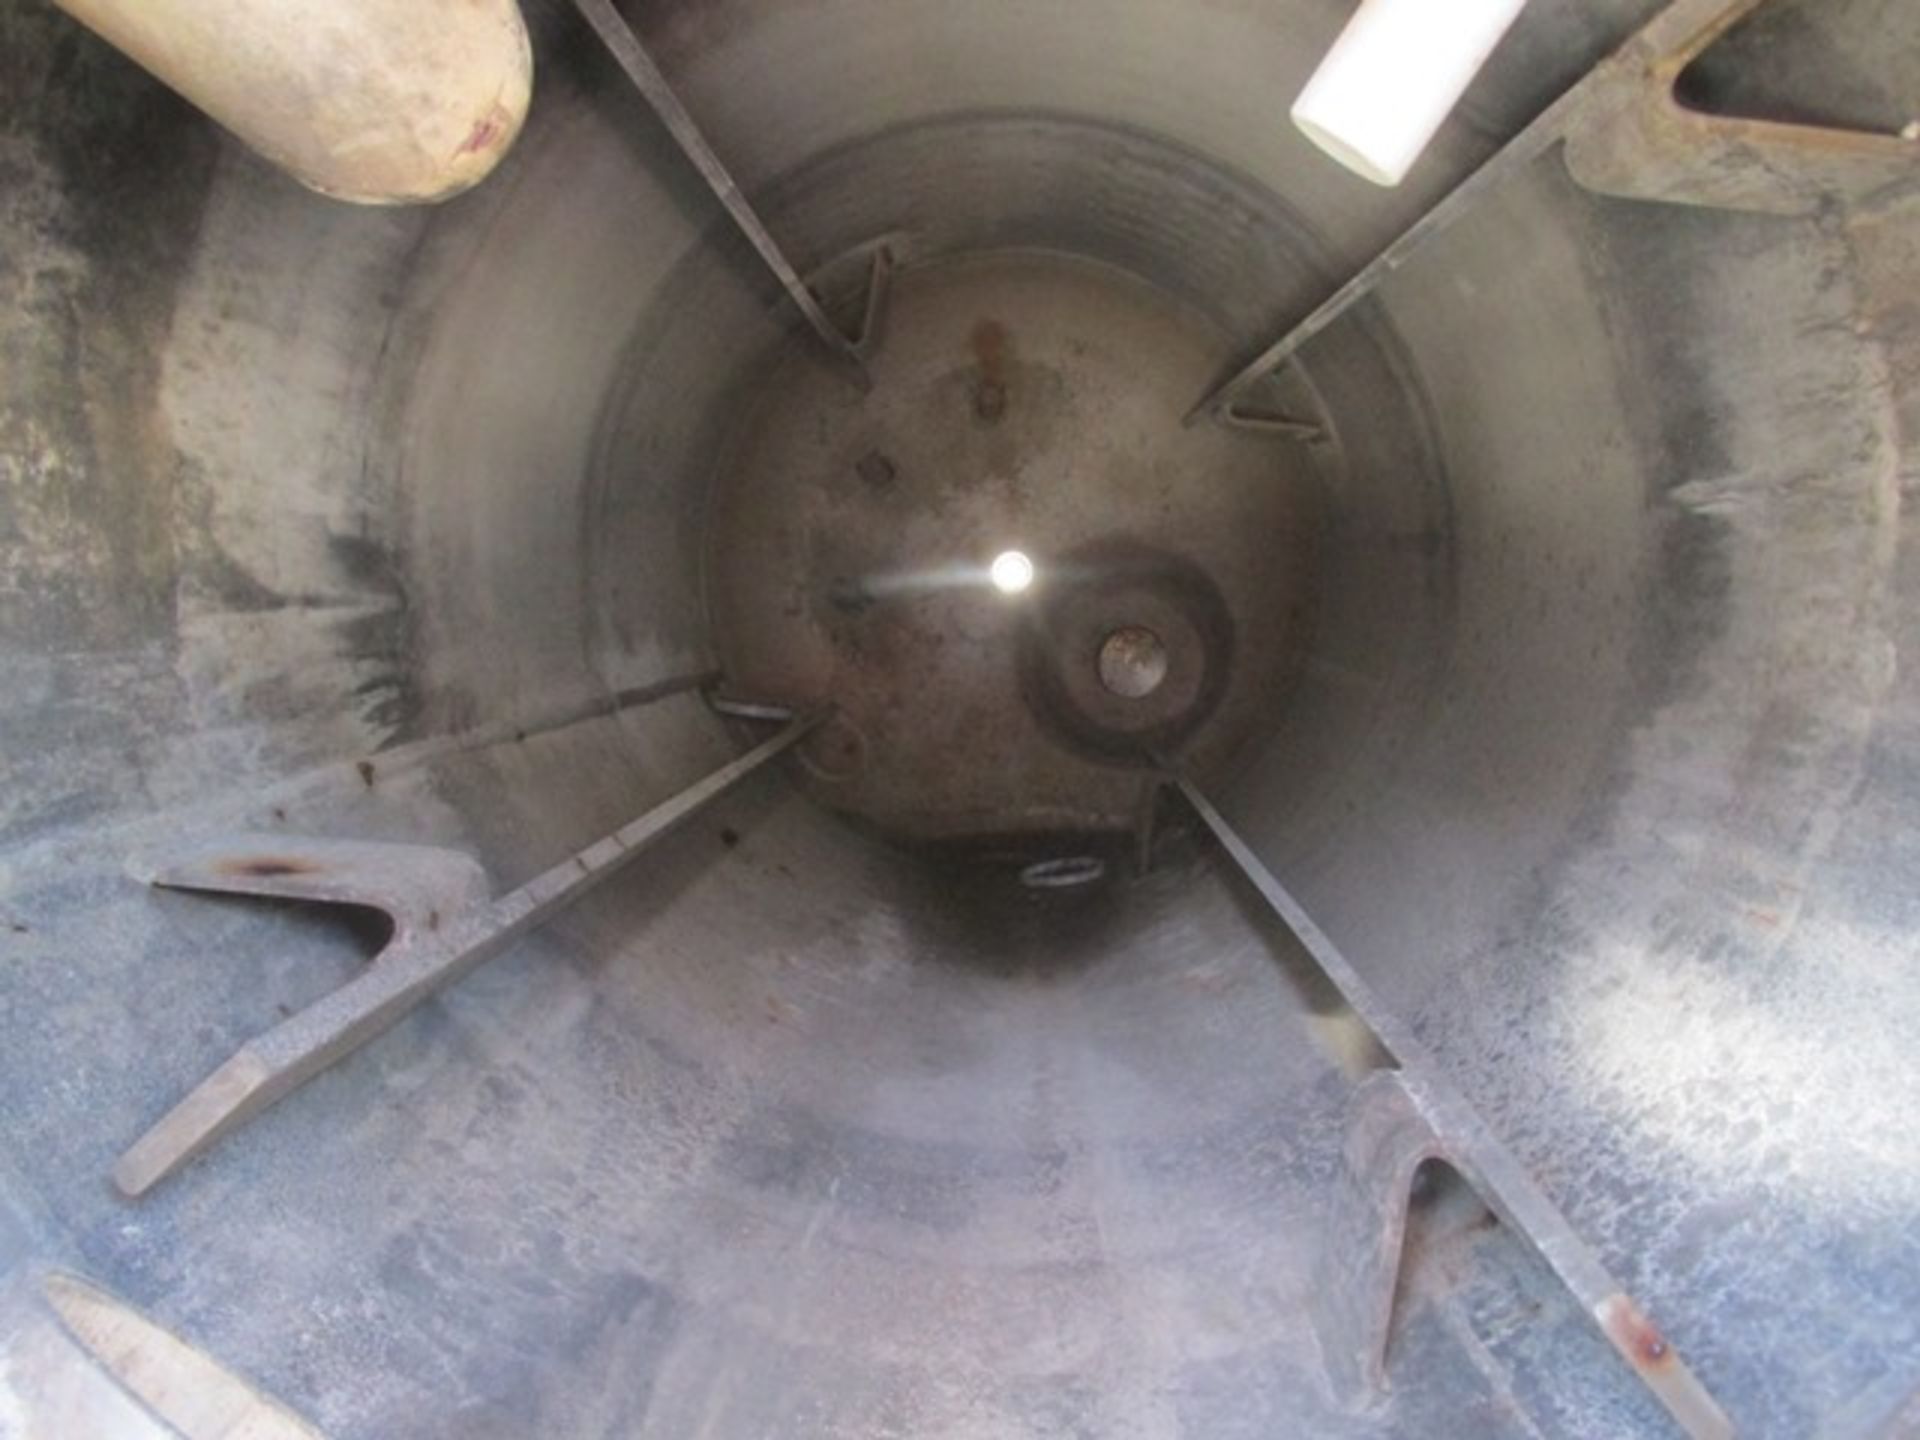 100 gallon Tolan reactor body, stainless steel construction,approx. 24" diameter x 48" straight side - Image 5 of 9